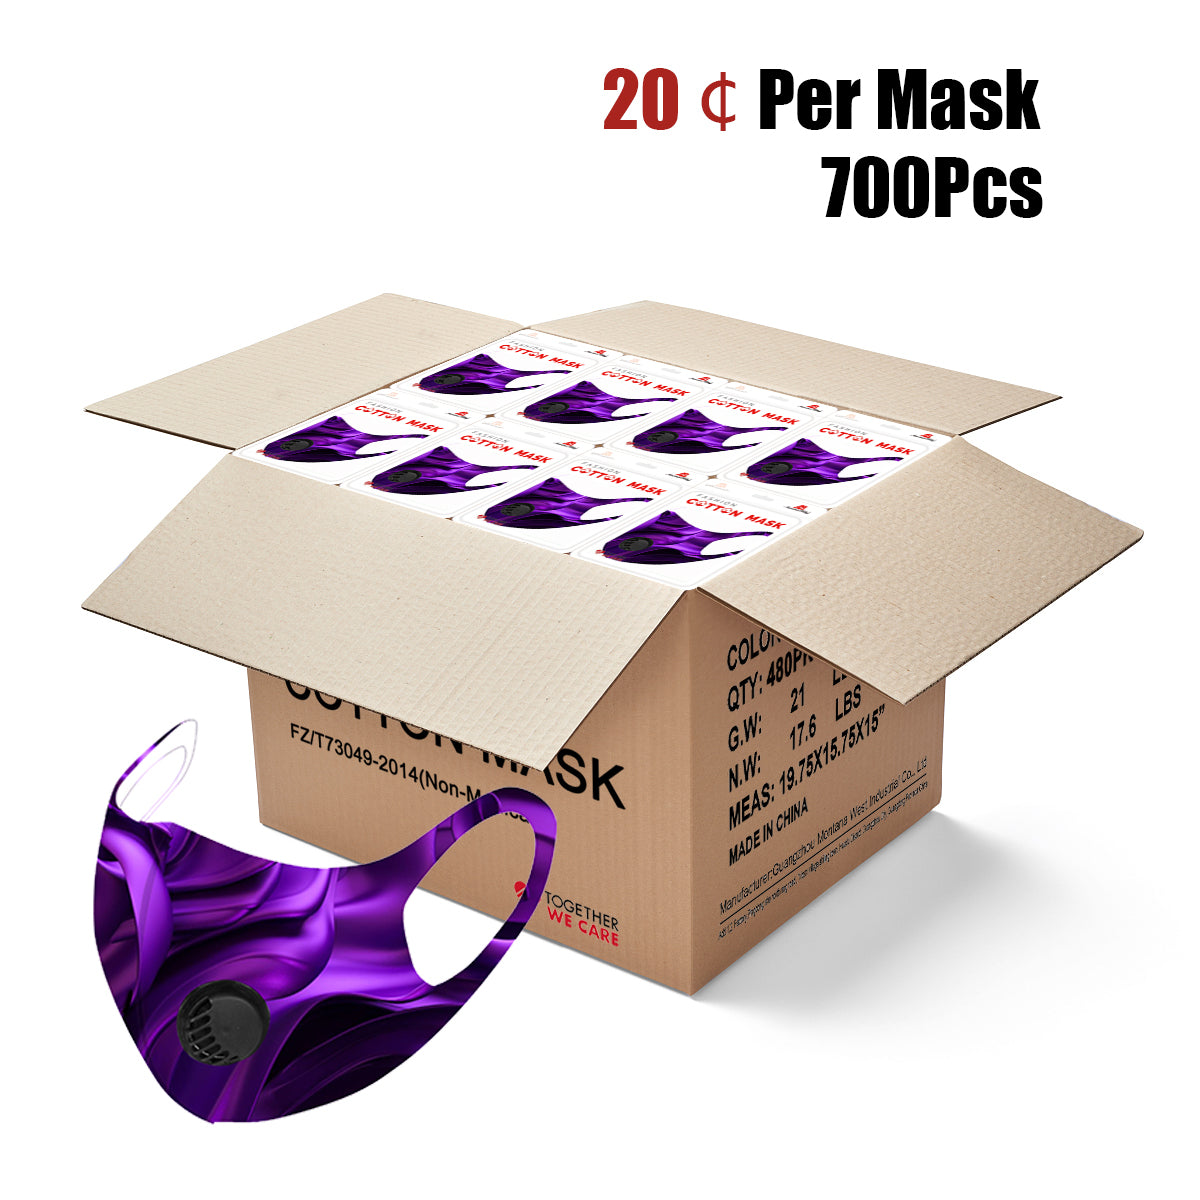 700Pcs Dust Mask with Filter, Fashion Washable Cloth Face Mask Reusable, Purple flower print